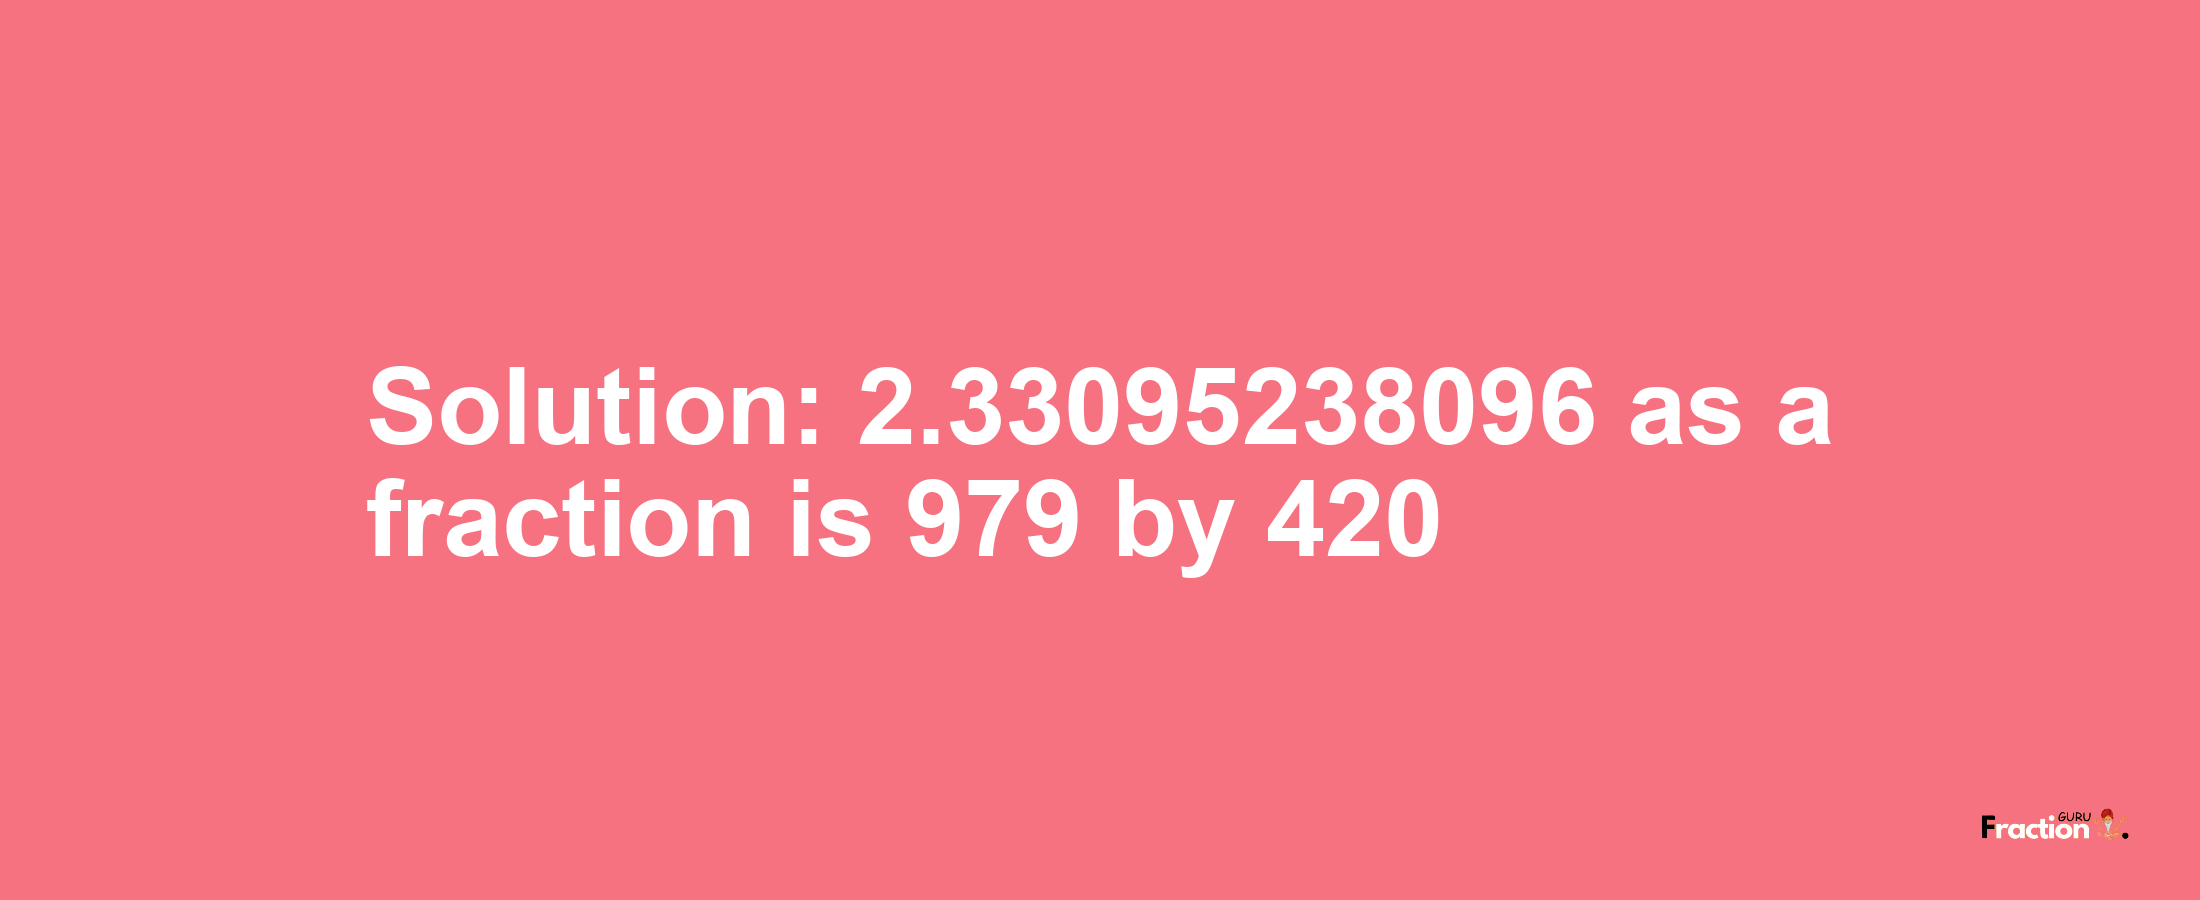 Solution:2.33095238096 as a fraction is 979/420